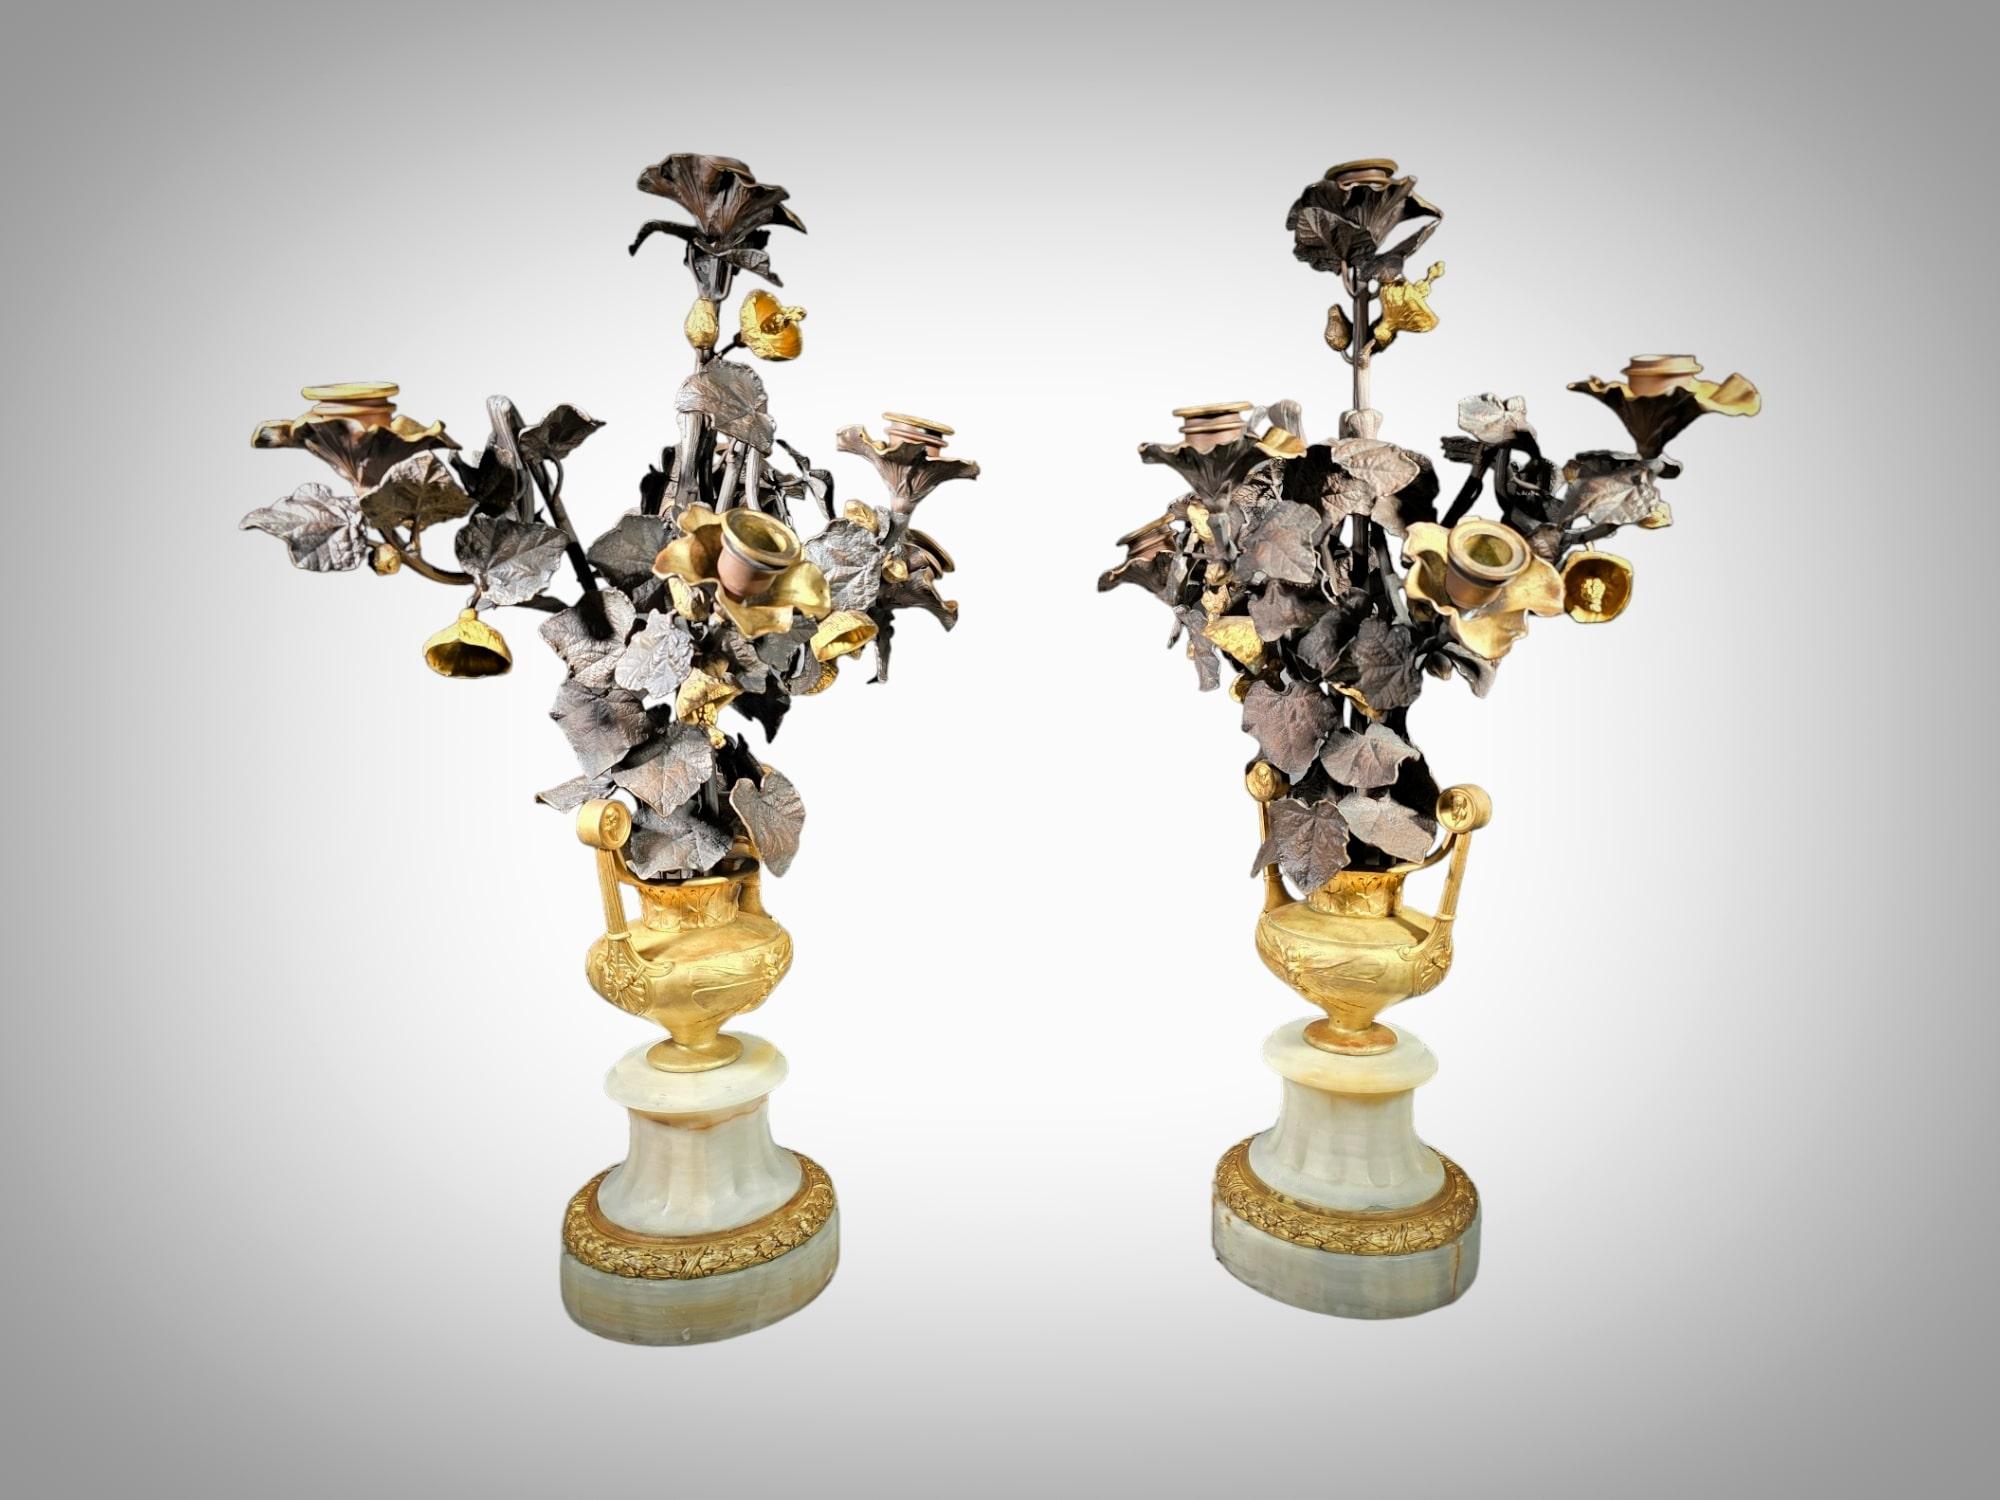 Stunning Gilt Bronze Vases with Flowers, Possibly Italian from the 19th Century For Sale 6